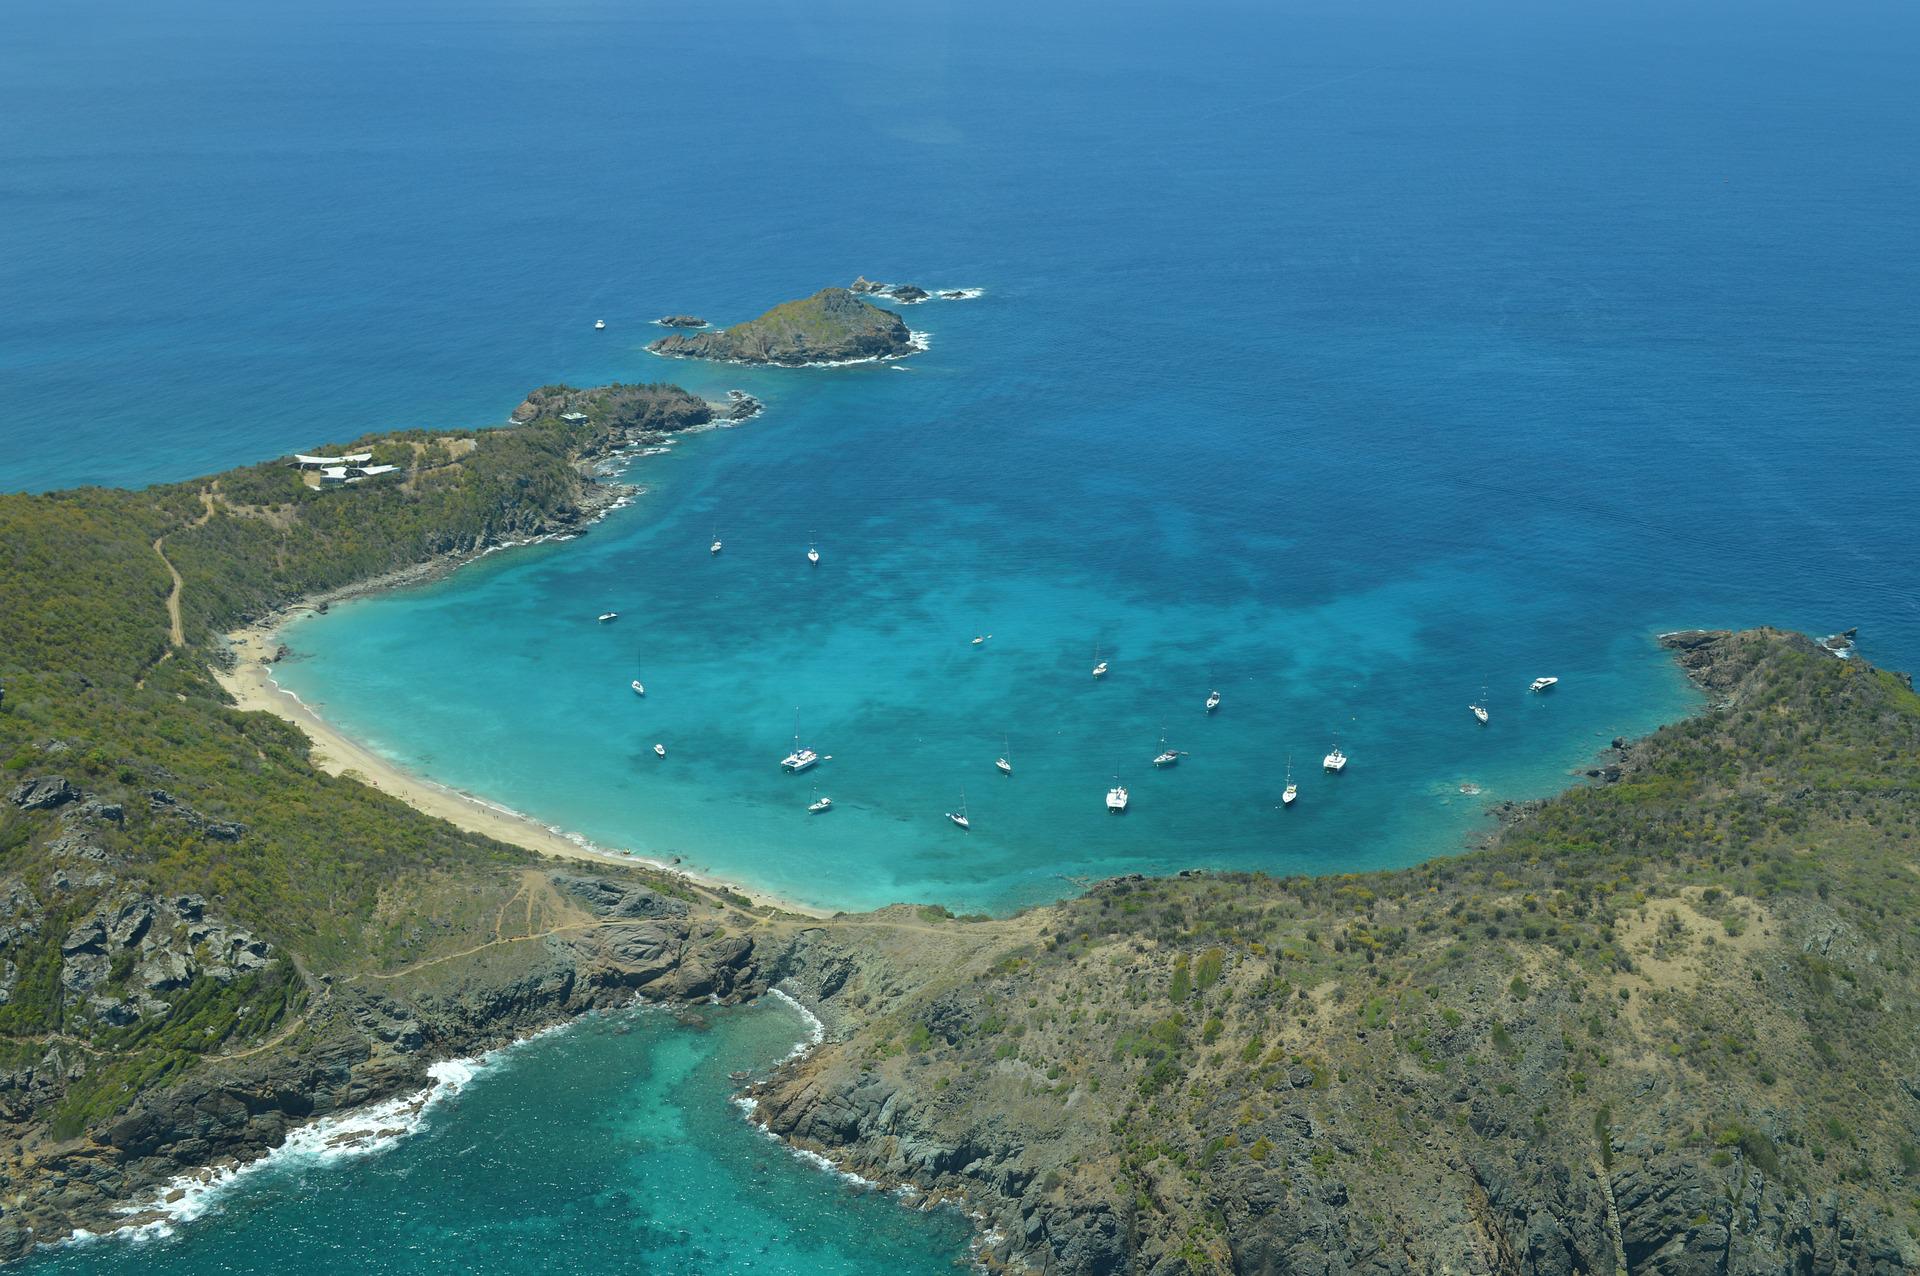 Picture from above of St Barth